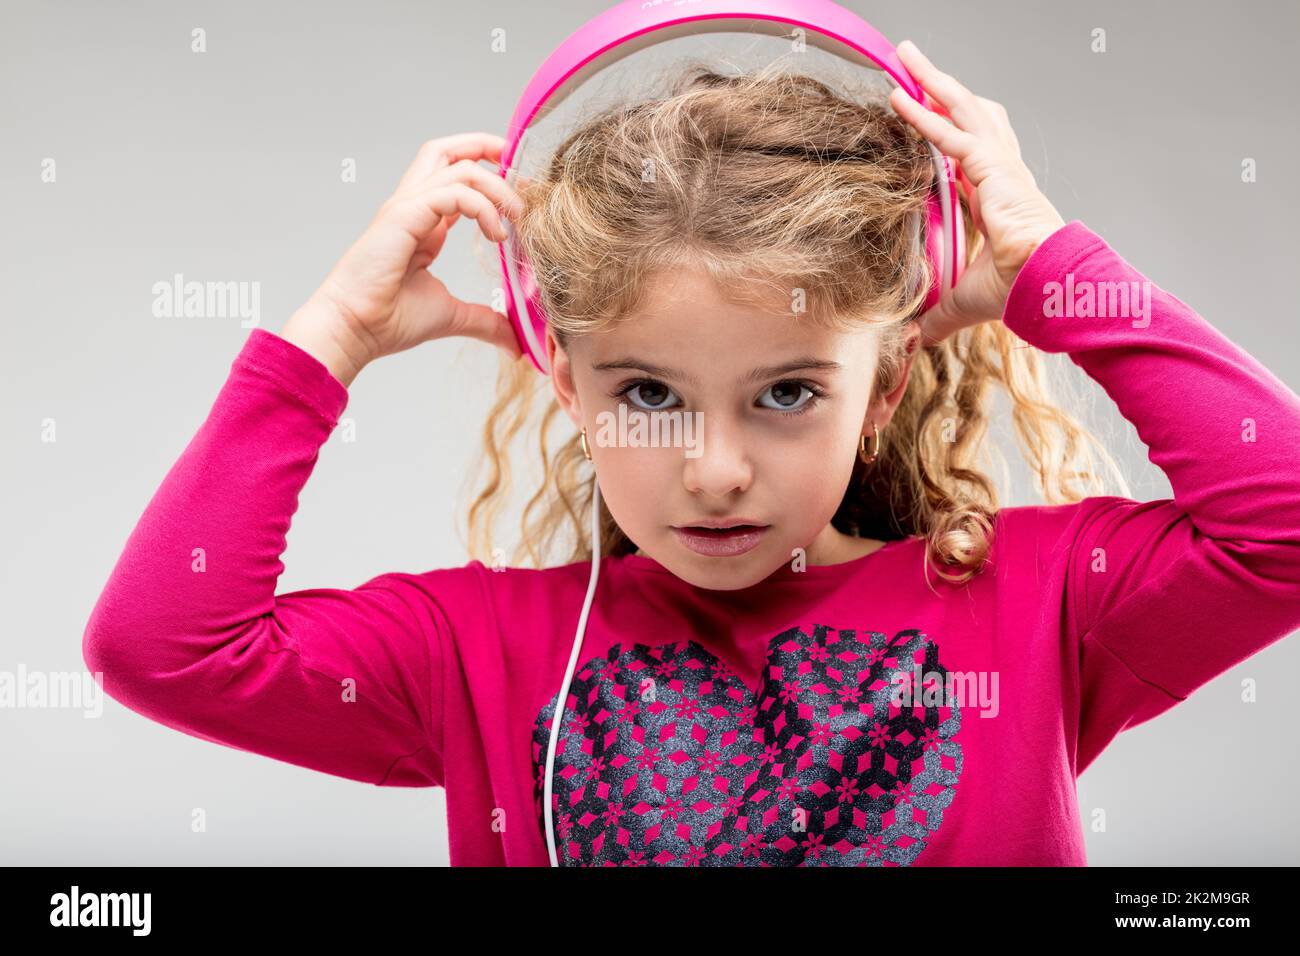 L girl listening to music on pink headphones Stock Photo